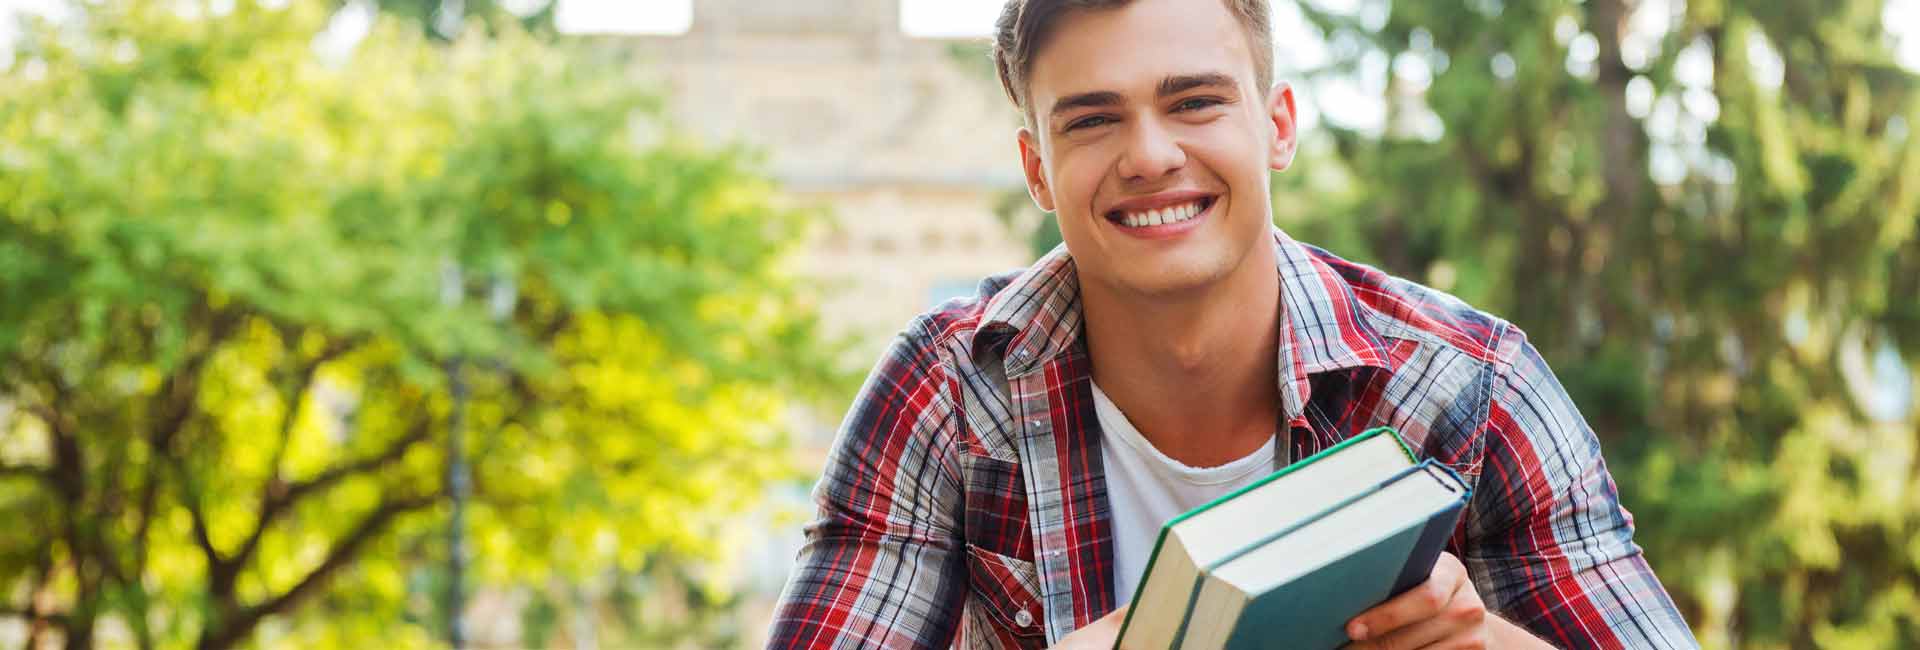 young man smiling  holding books